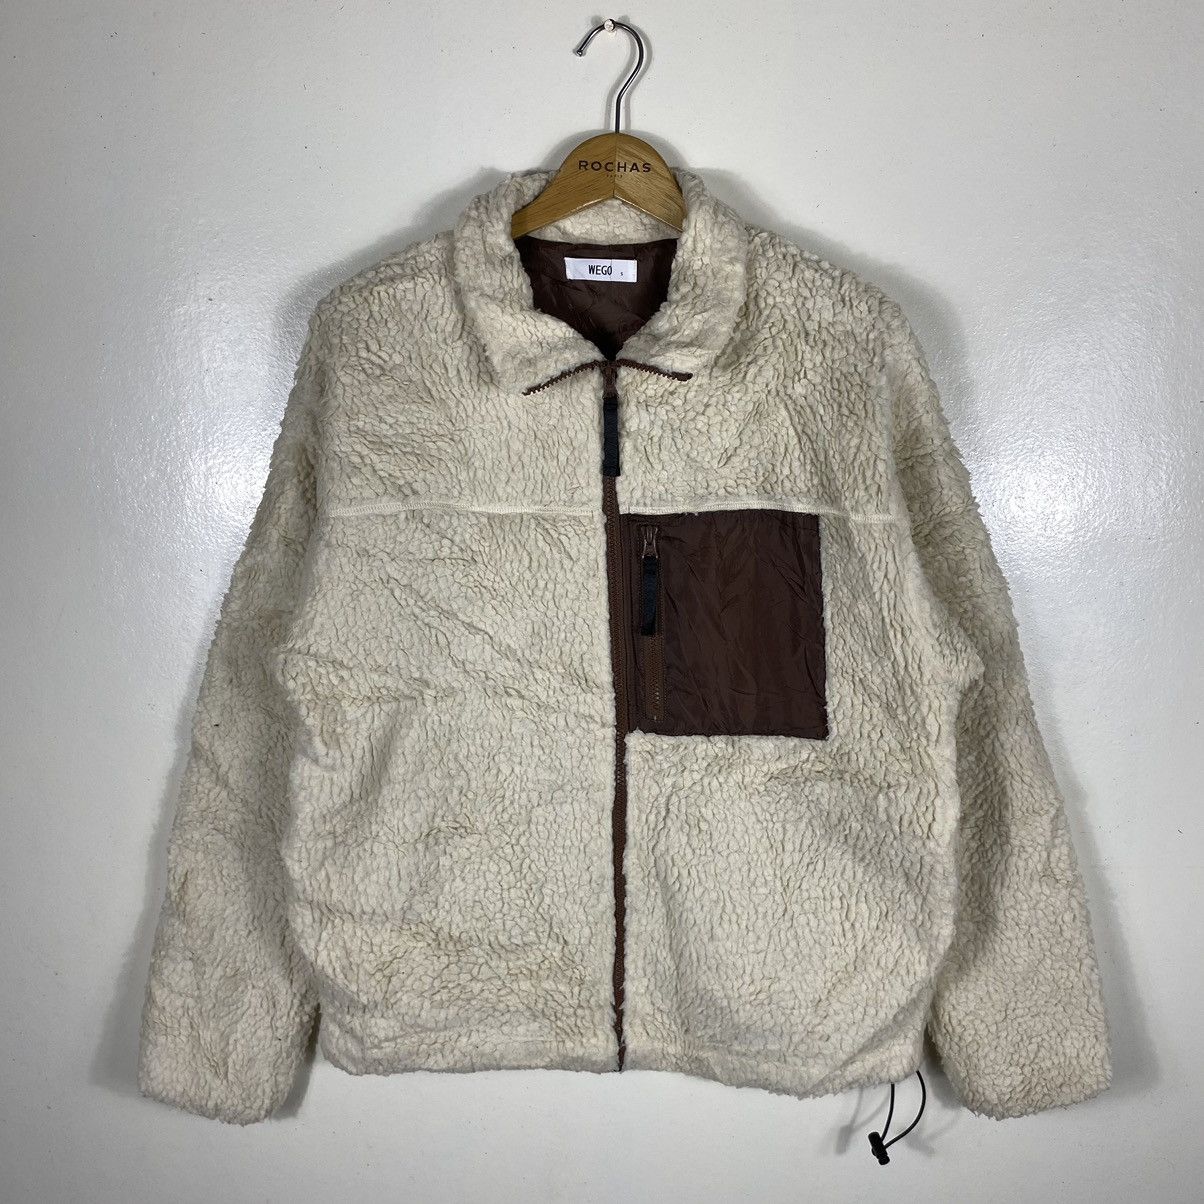 Japanese Brand Japanese Brand Wego Sherpa Jacket Patagonia Style Size US S / EU 44-46 / 1 - 1 Preview